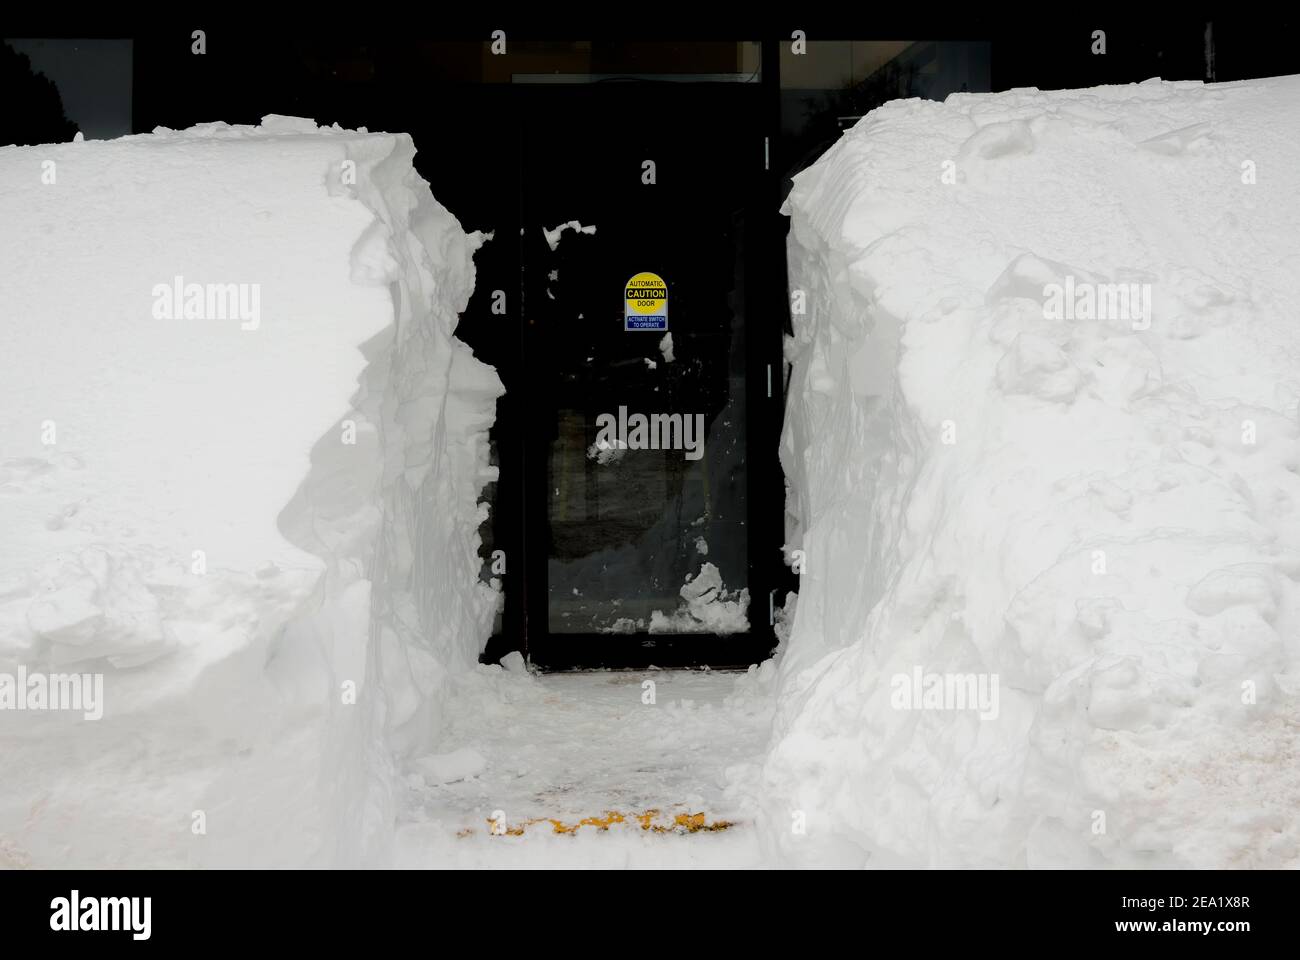 A path cut through a snowbank leading to a door. The sign on the door says CAUTION AUTOMATIC DOOR ACTIVATE SWITCH TO OPERATE. Stock Photo